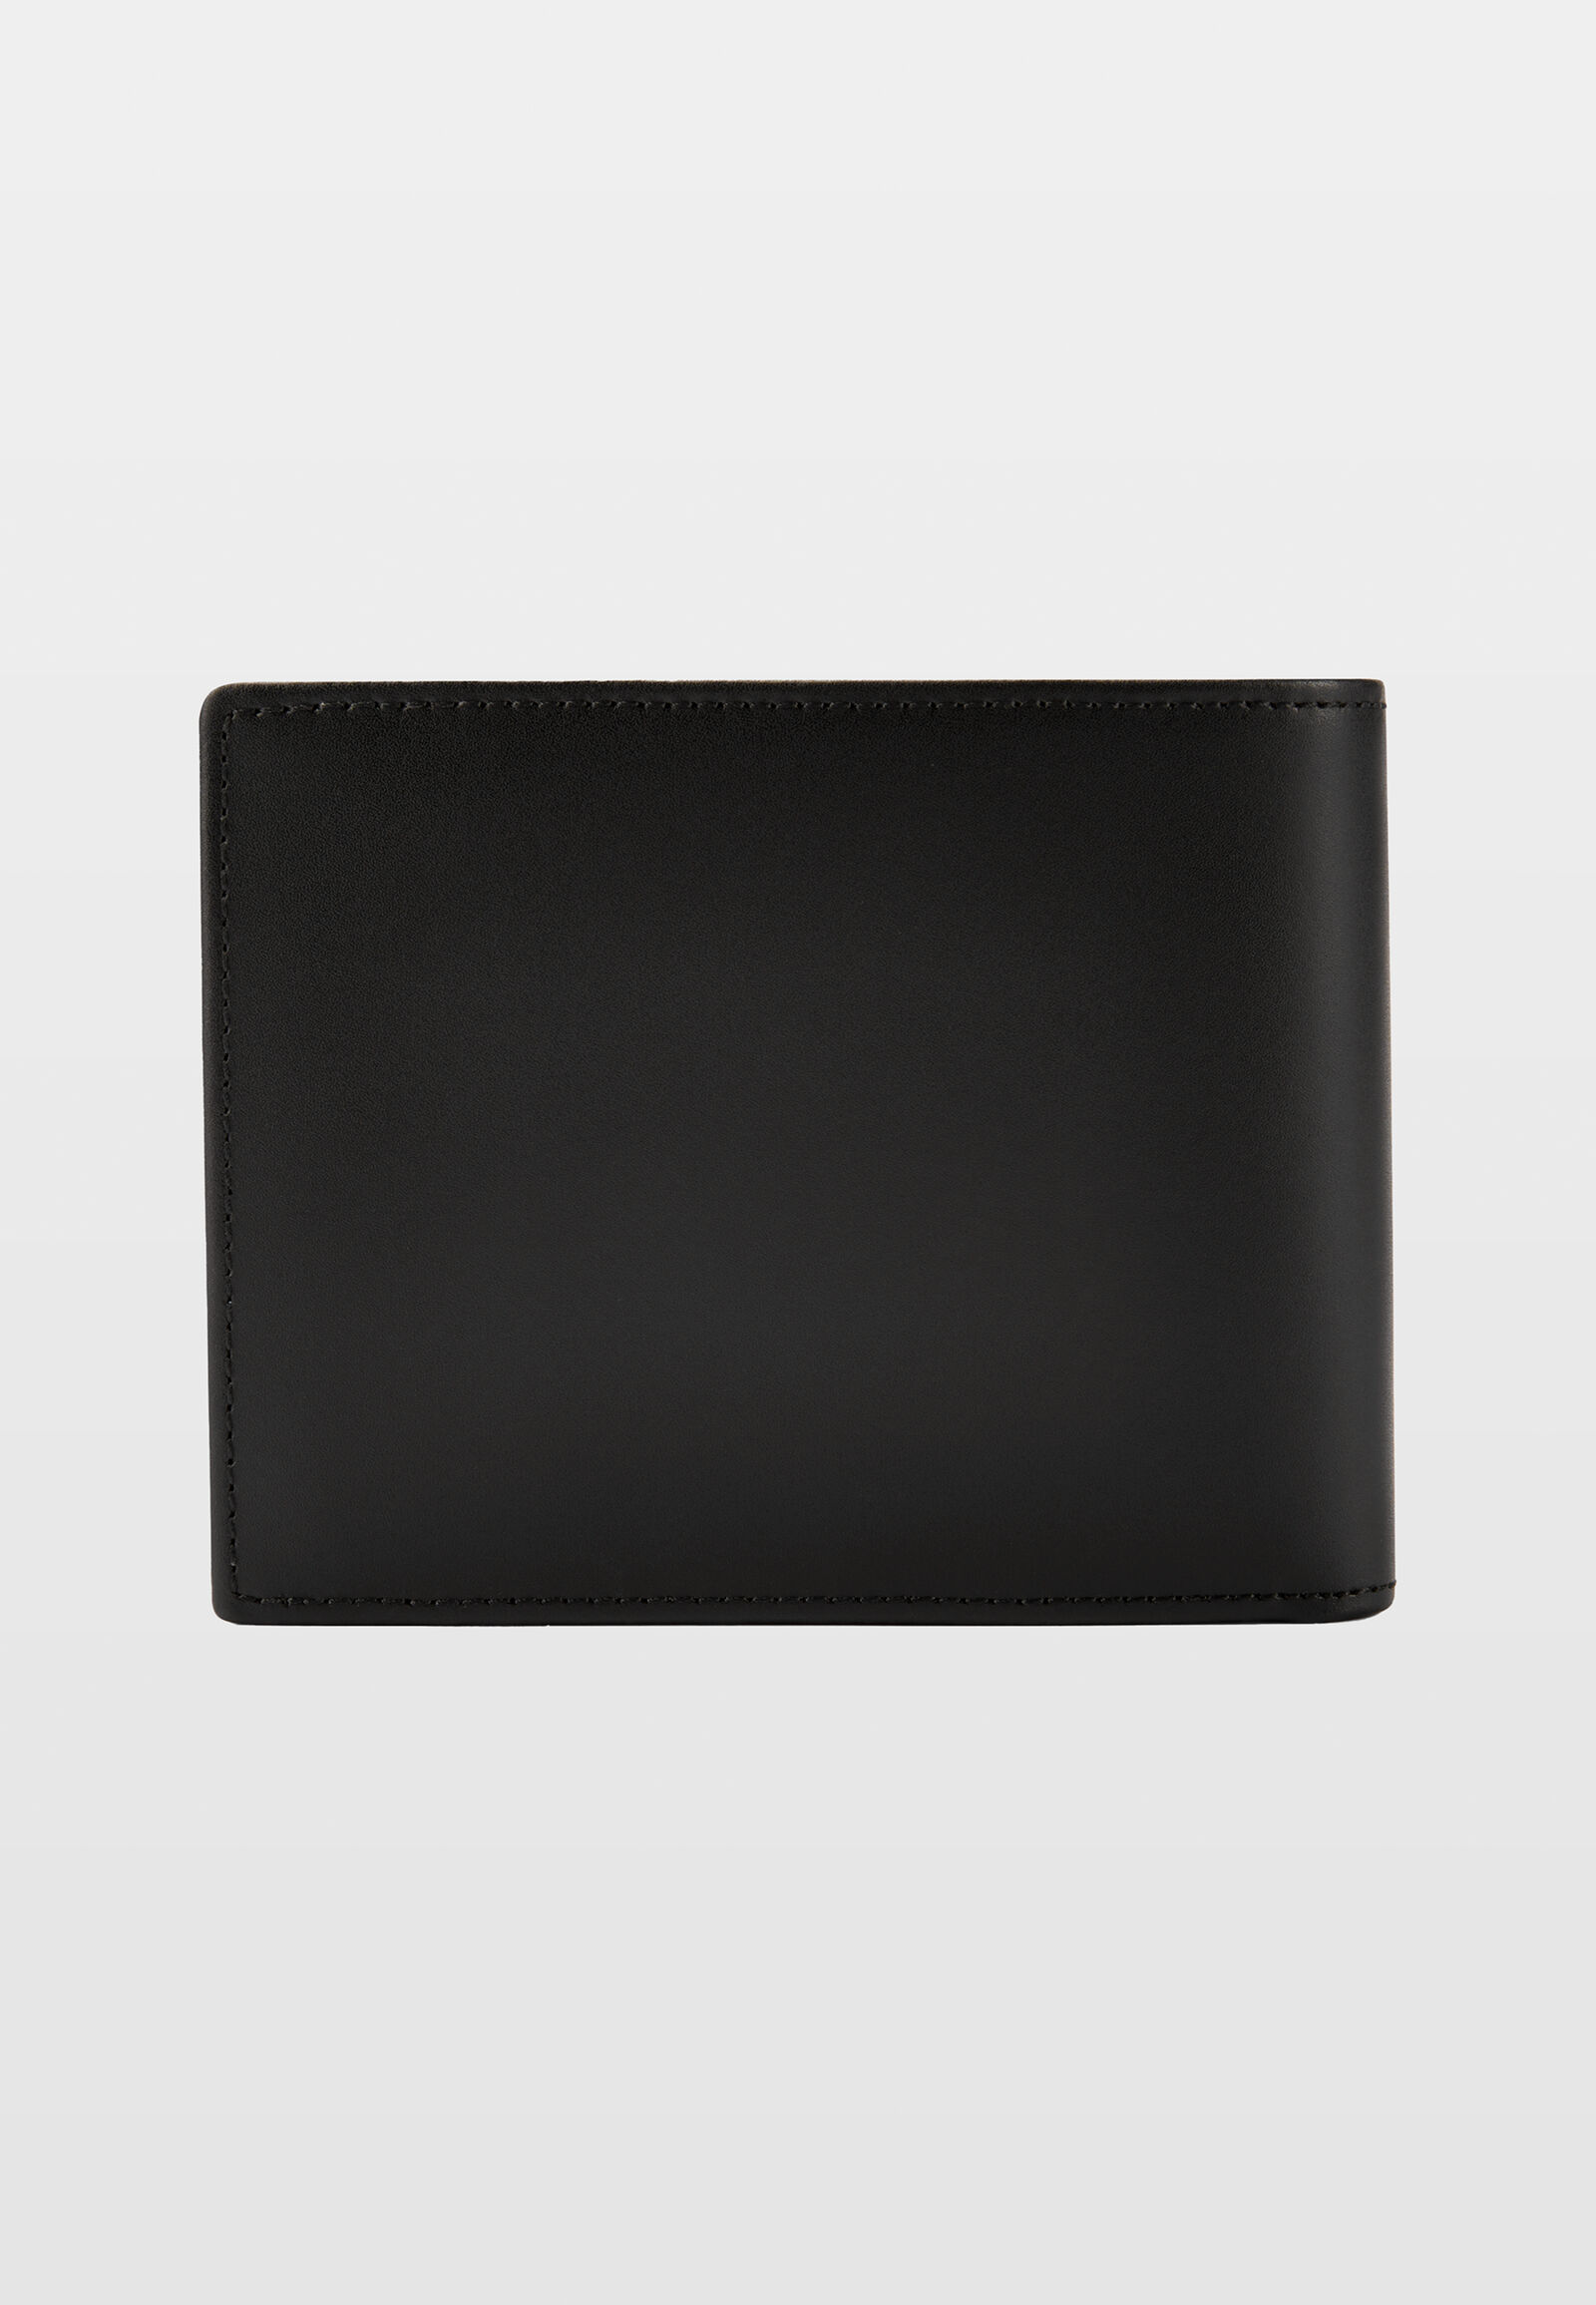 BMW M Wallet with coin pocket | BMW Lifestyle Shop